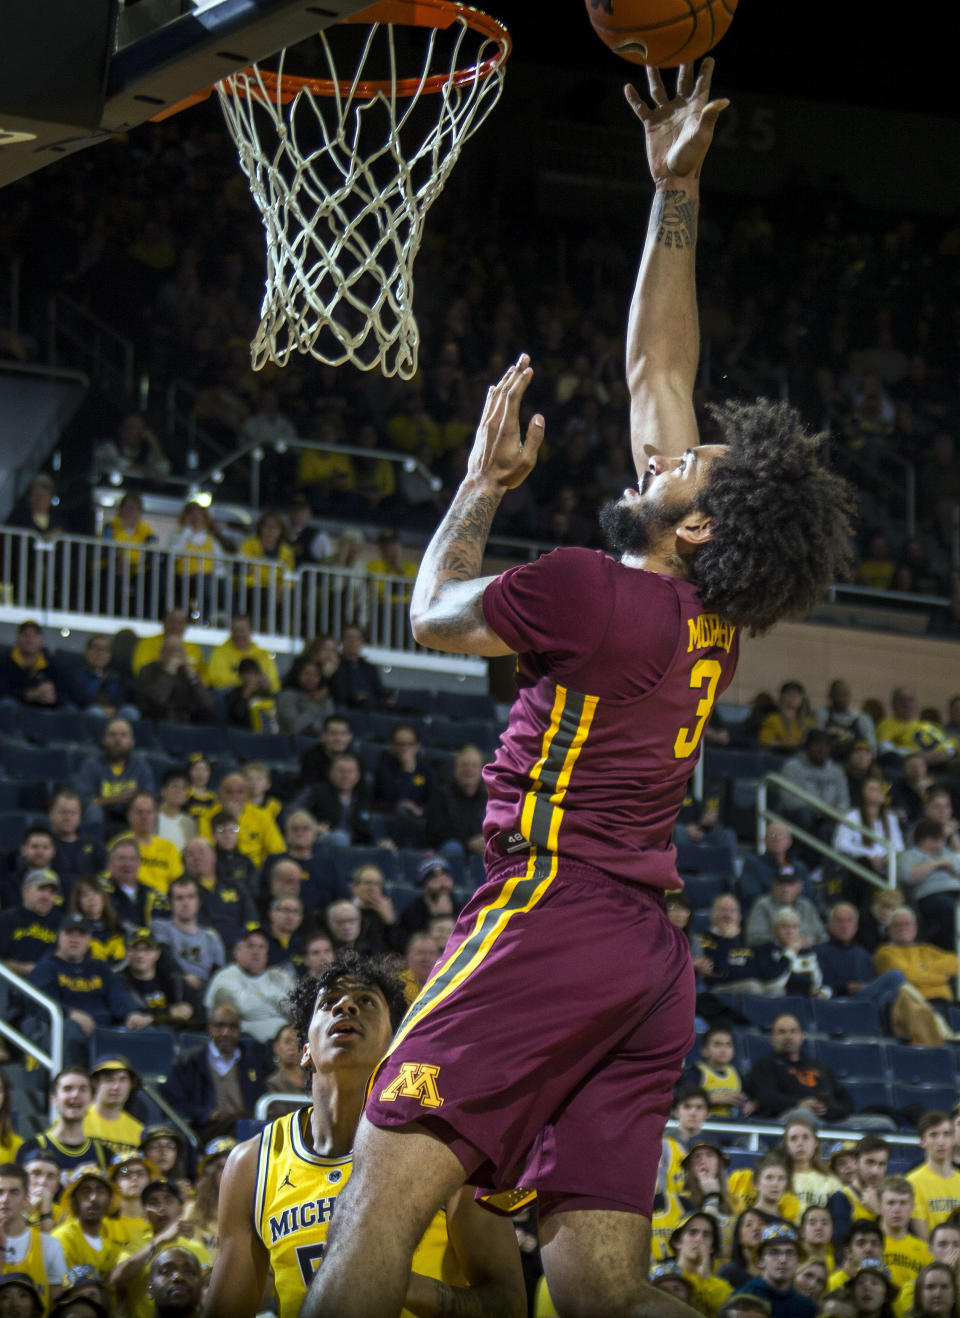 Minnesota forward Jordan Murphy (3) makes a basket, watched by Michigan guard Zavier Simpson, bottom, in the first half of an NCAA college basketball game at Crisler Center in Ann Arbor, Mich., Tuesday, Jan. 22, 2019. (AP Photo/Tony Ding)